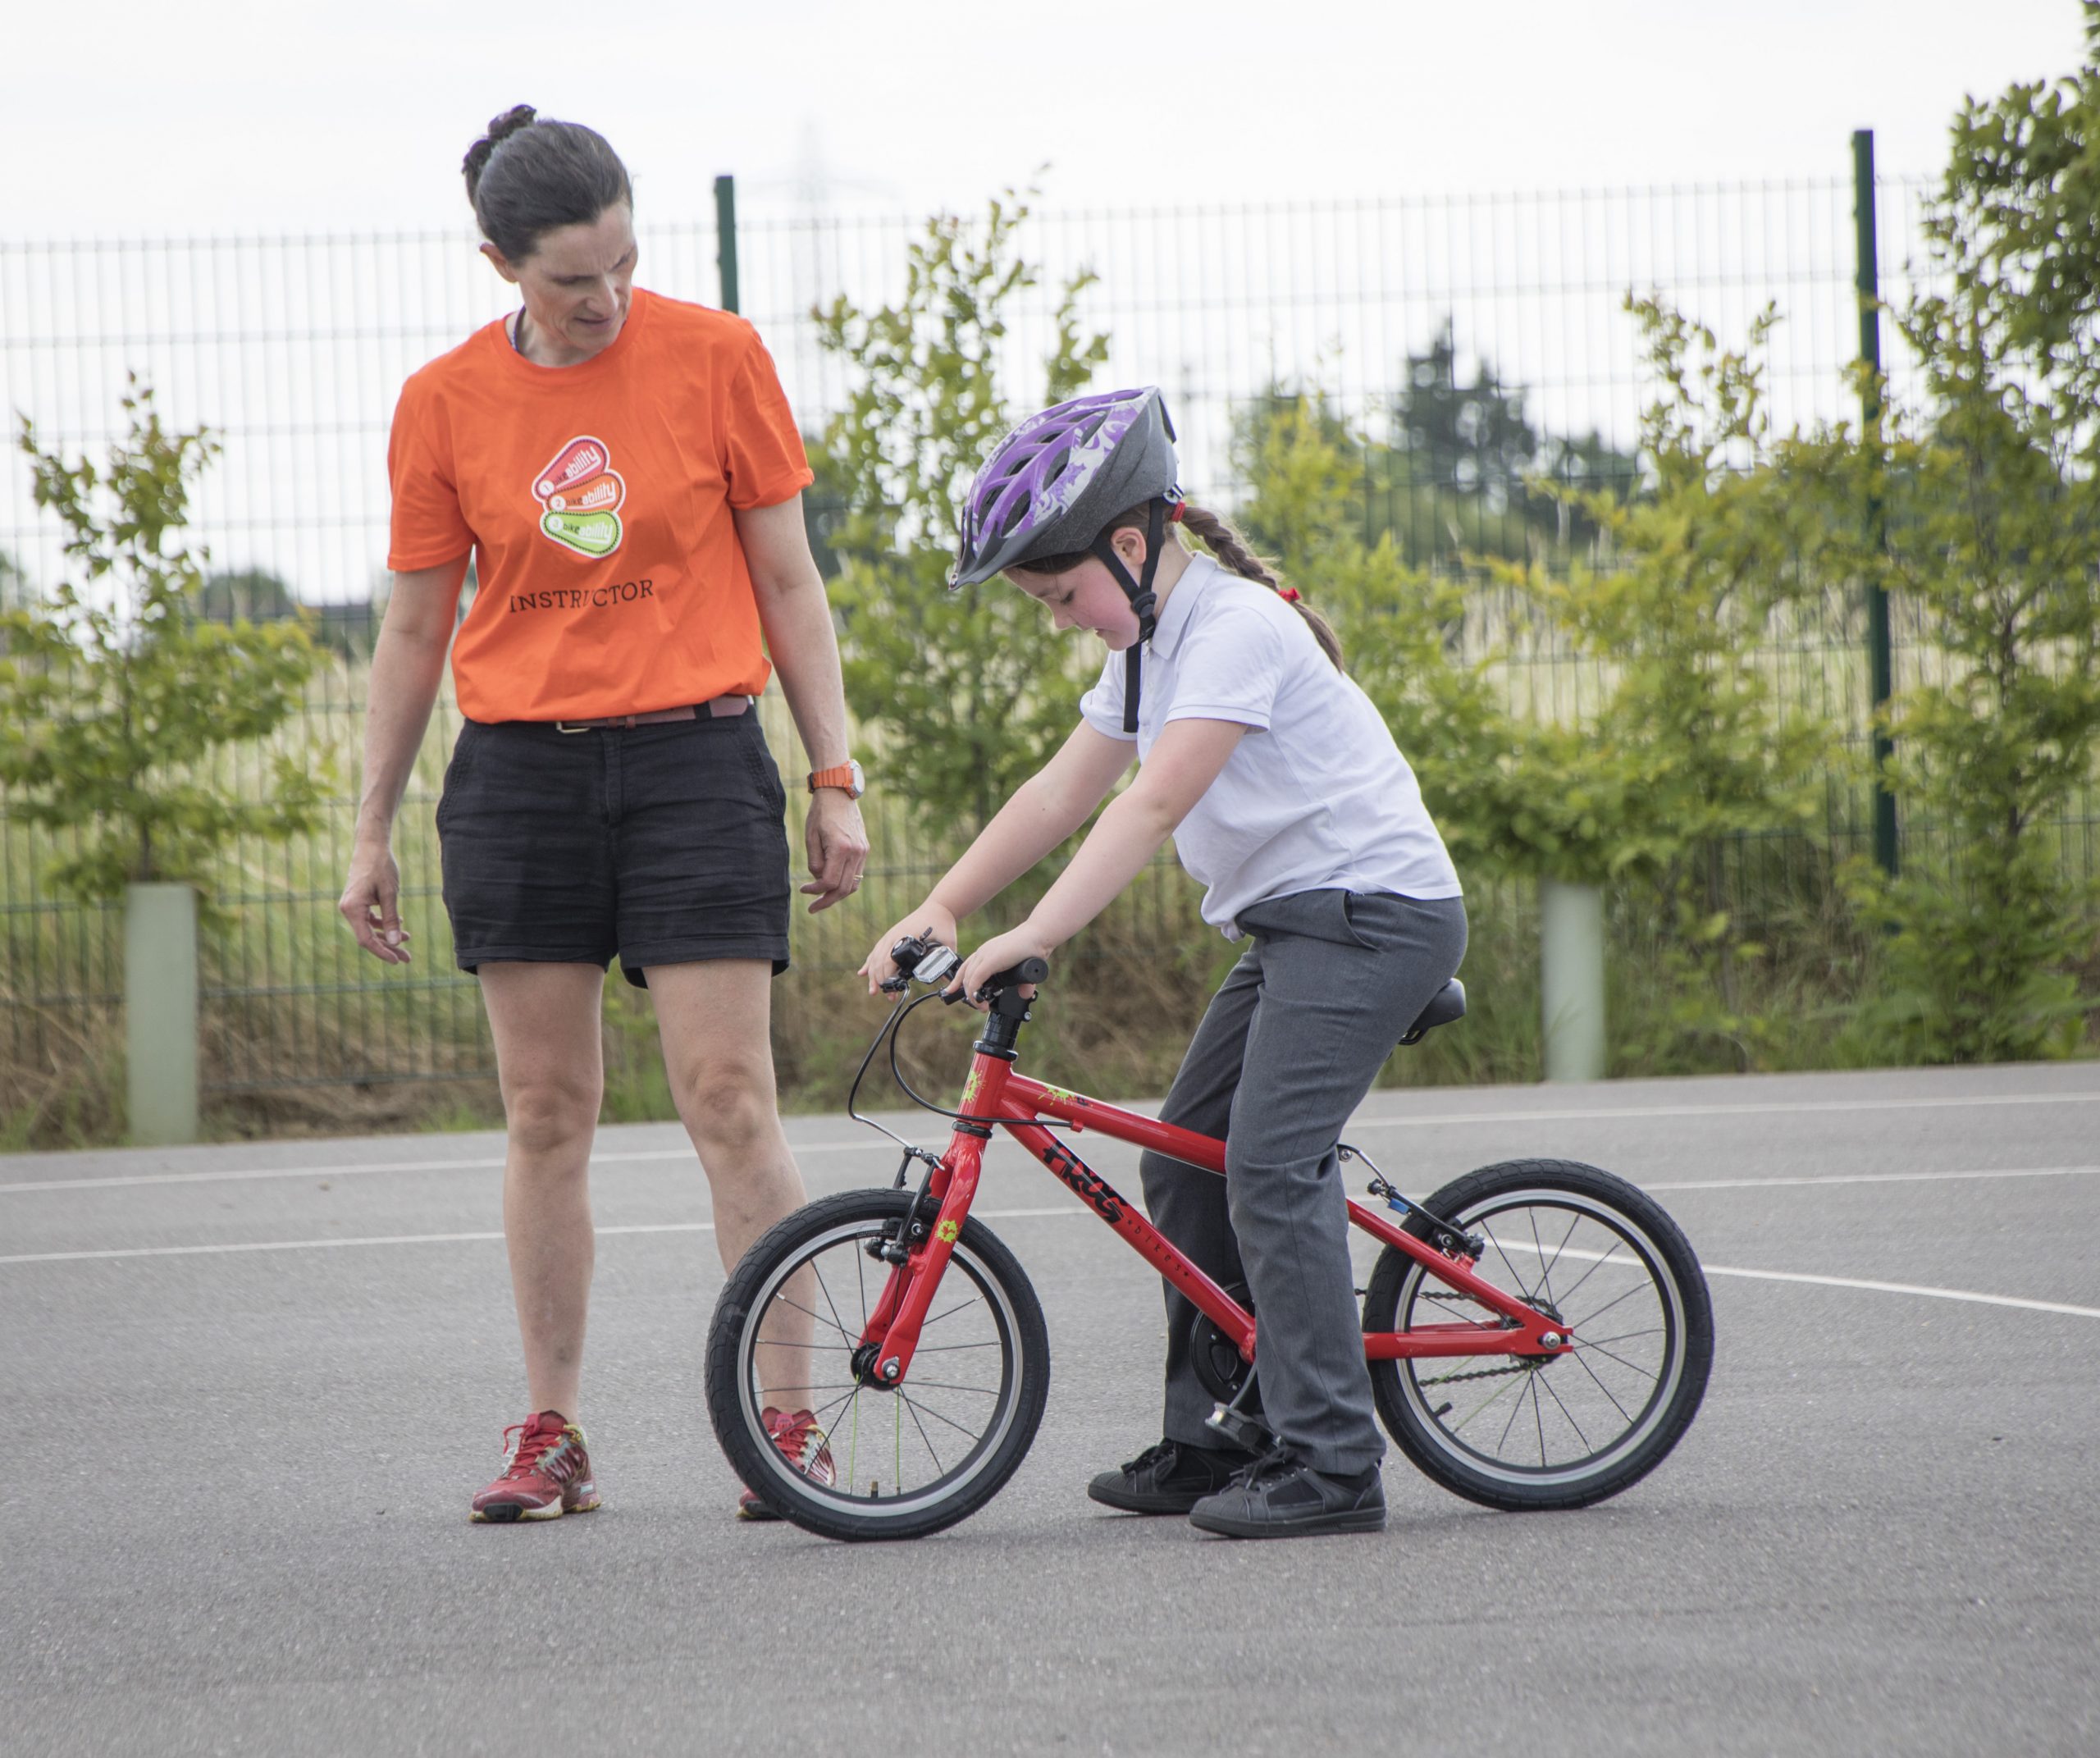 A female Bikeability instructor with a young girl on a bike